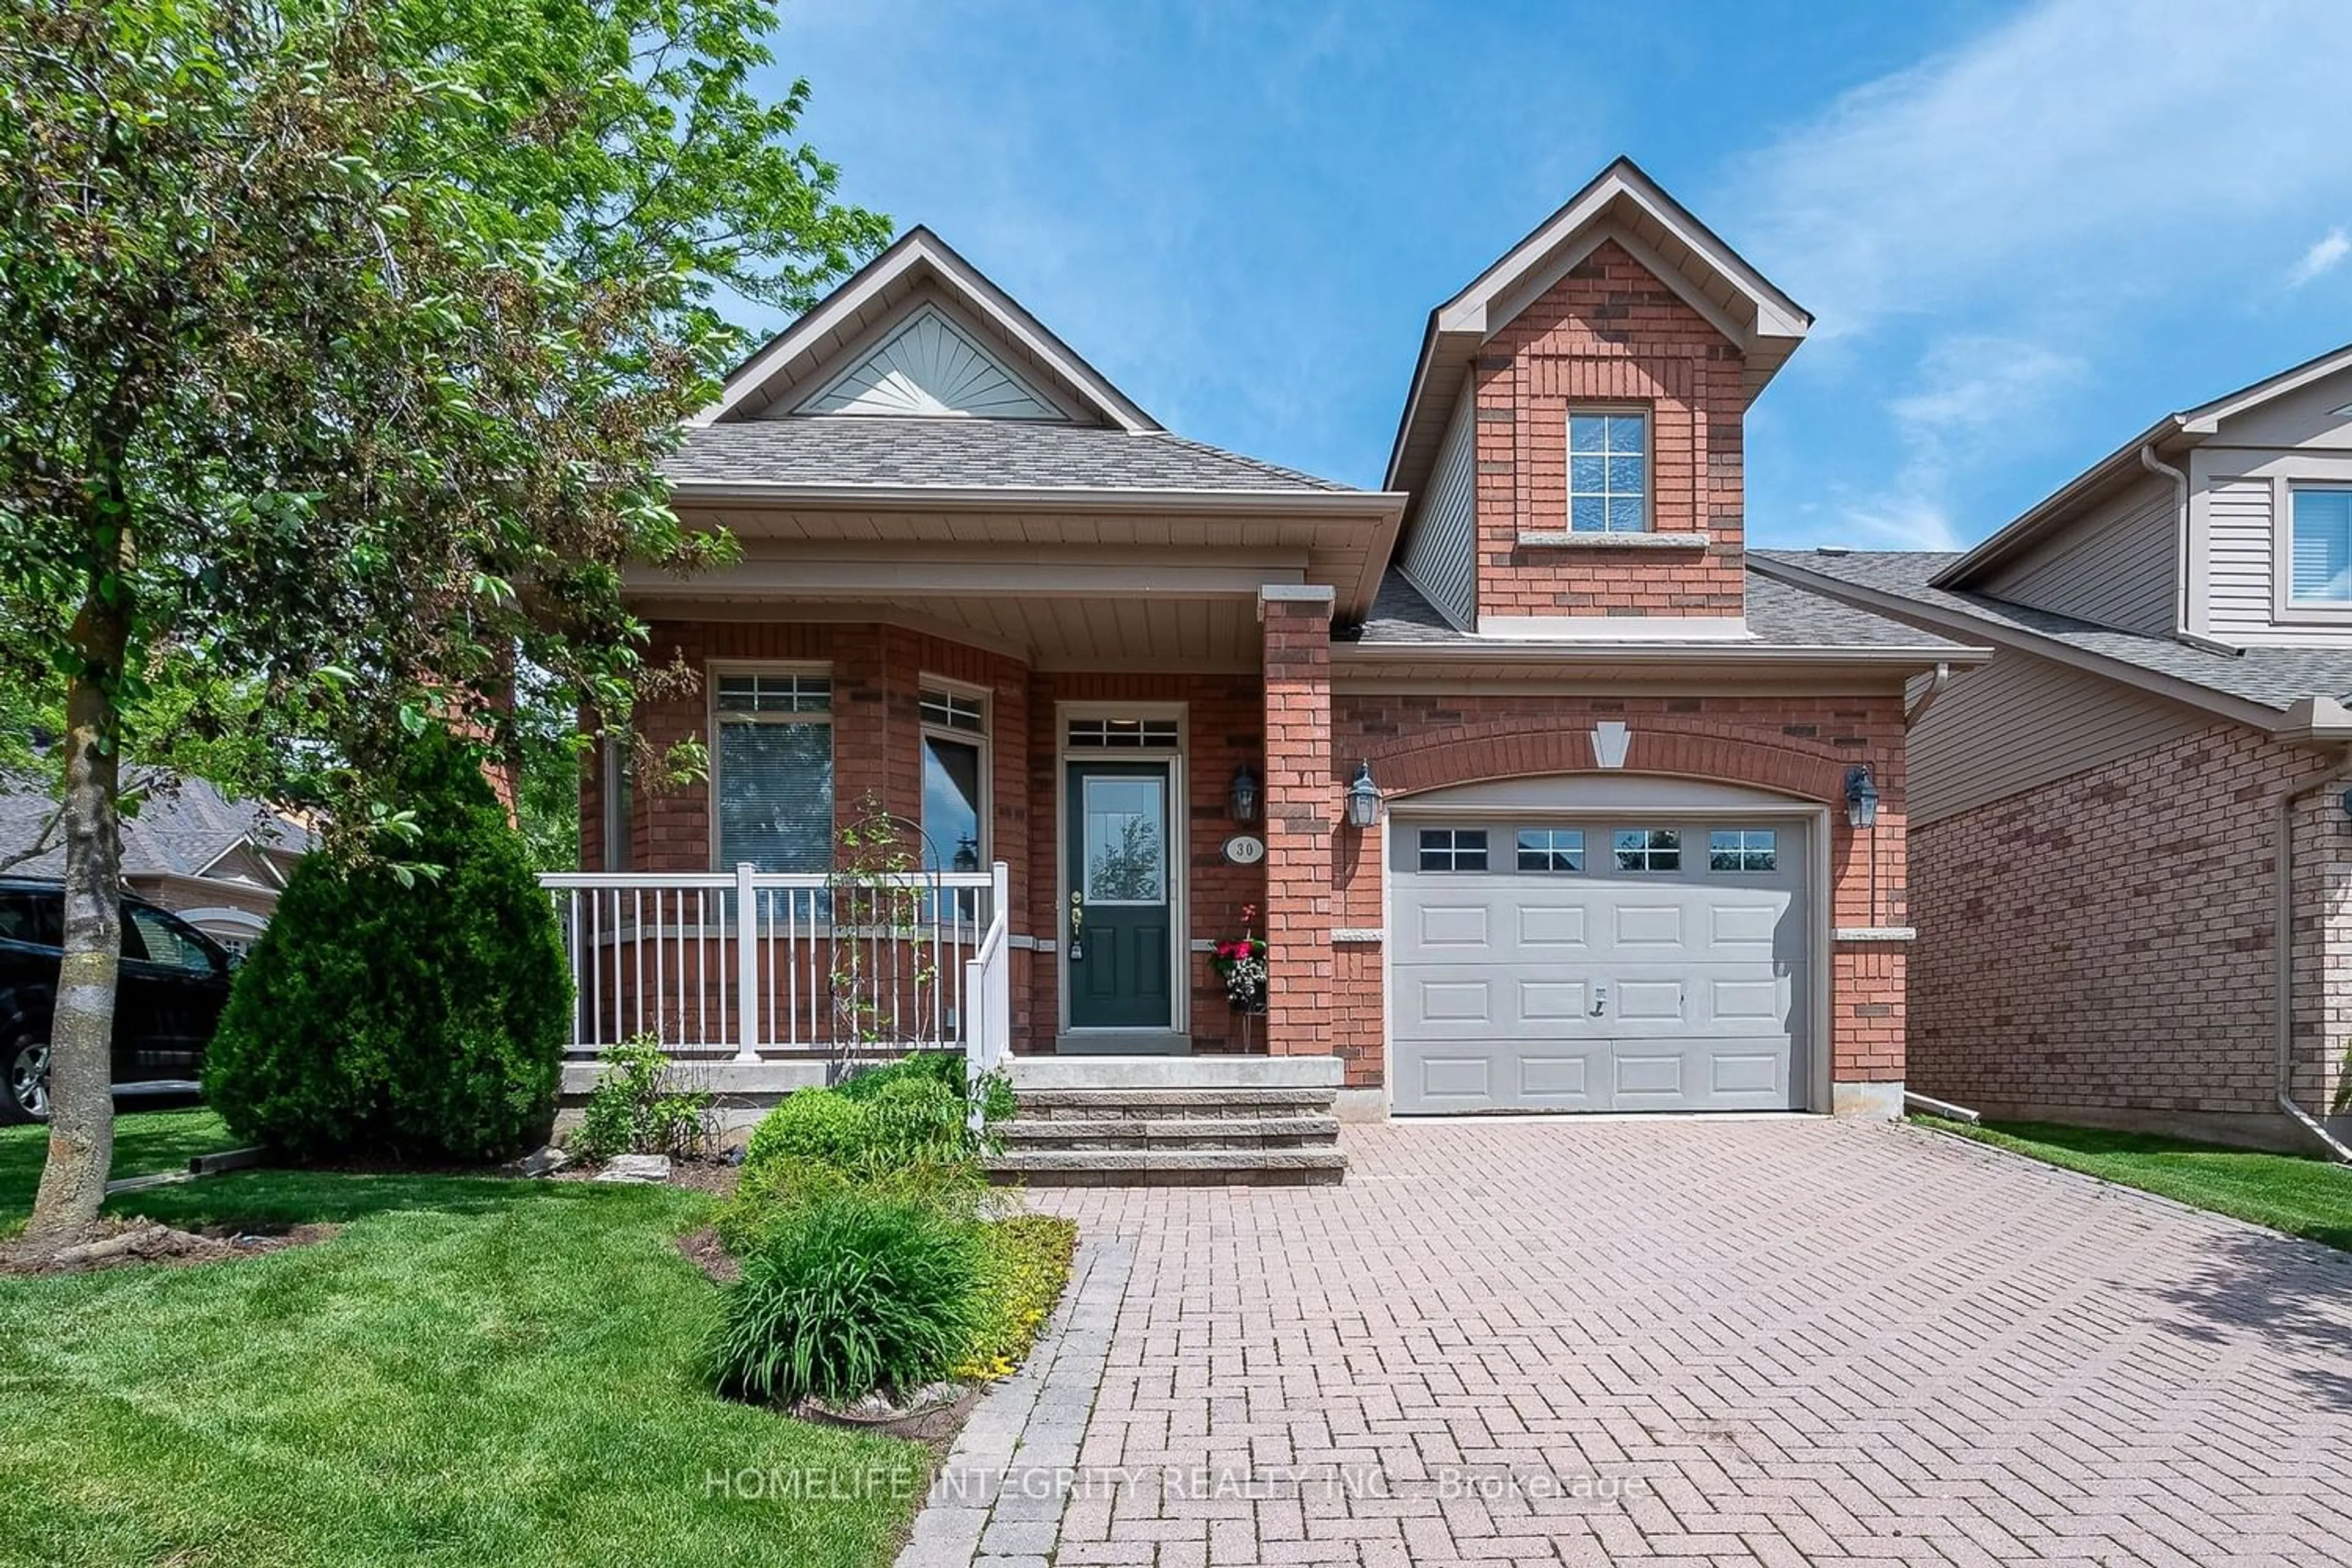 Home with brick exterior material for 30 Montebello Terr, New Tecumseth Ontario L9R 2H3